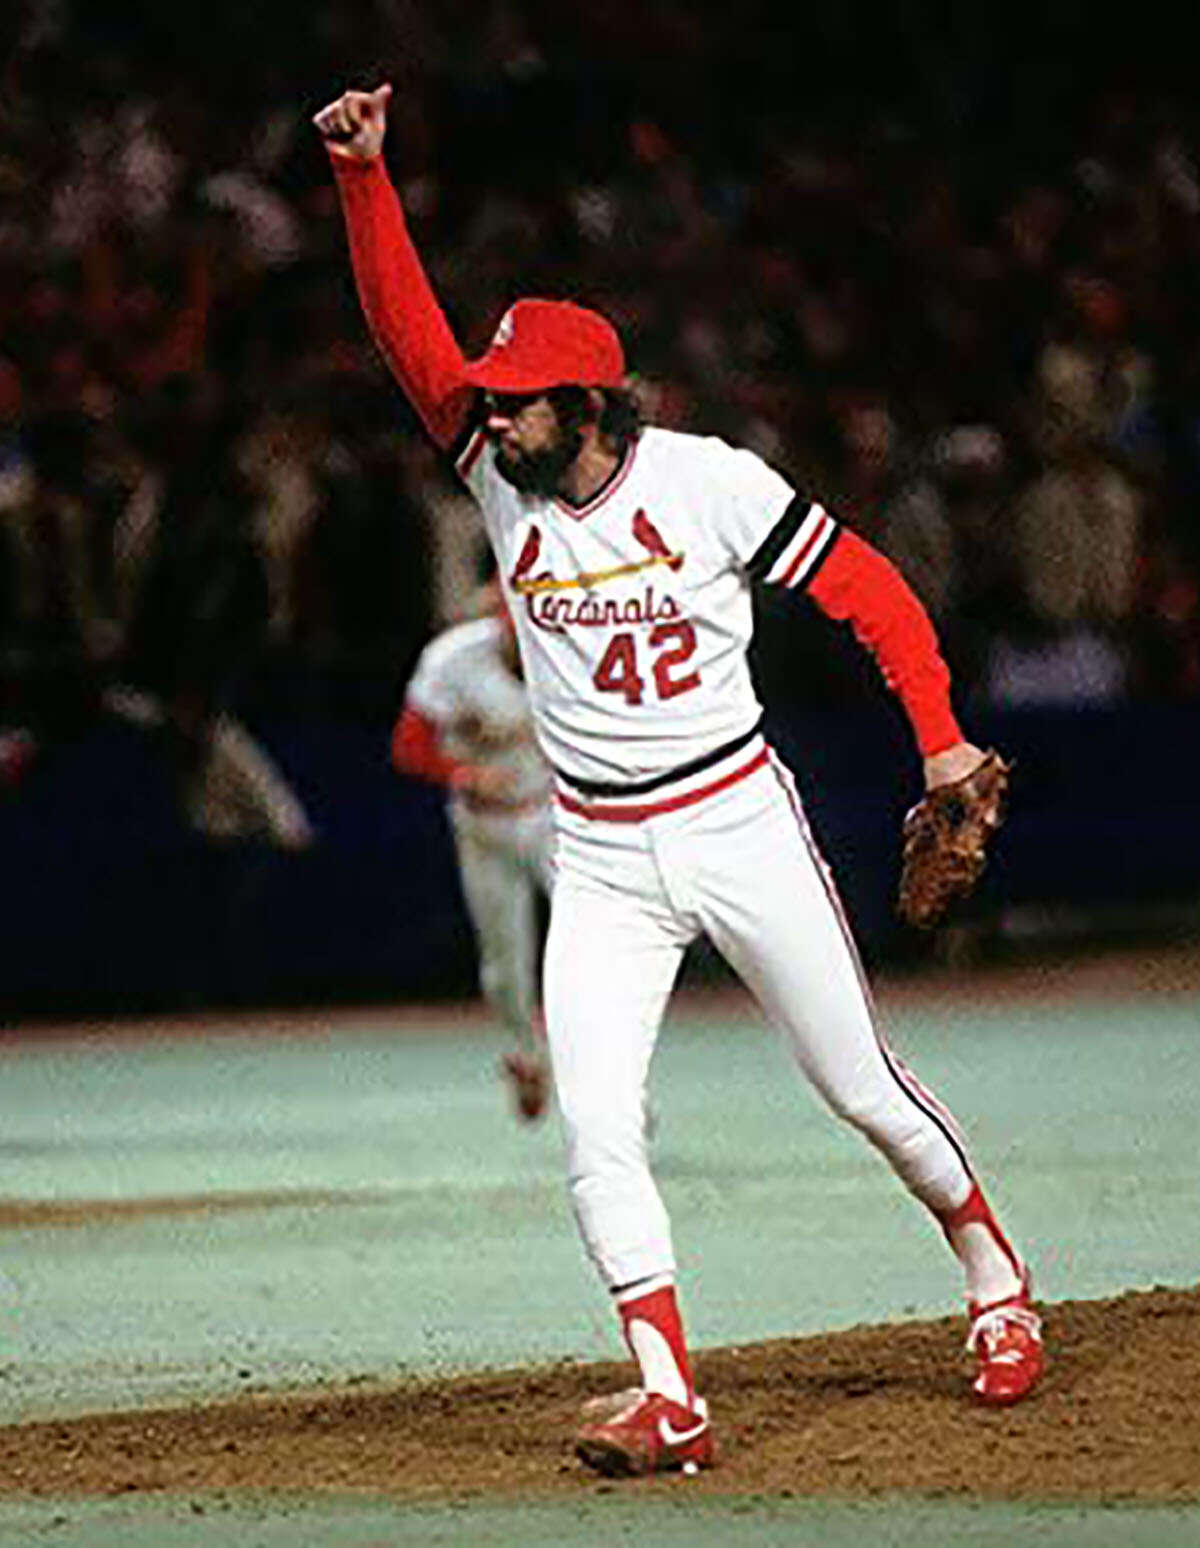 Former Cardinals reliever and Hall of Famer Bruce Sutter died Thursday night at the age of 69. He is shown celebrating the Cardinals winning Game 7 of the 1982 World Series against the Milwaukee Brewers at Busch Stadium II.